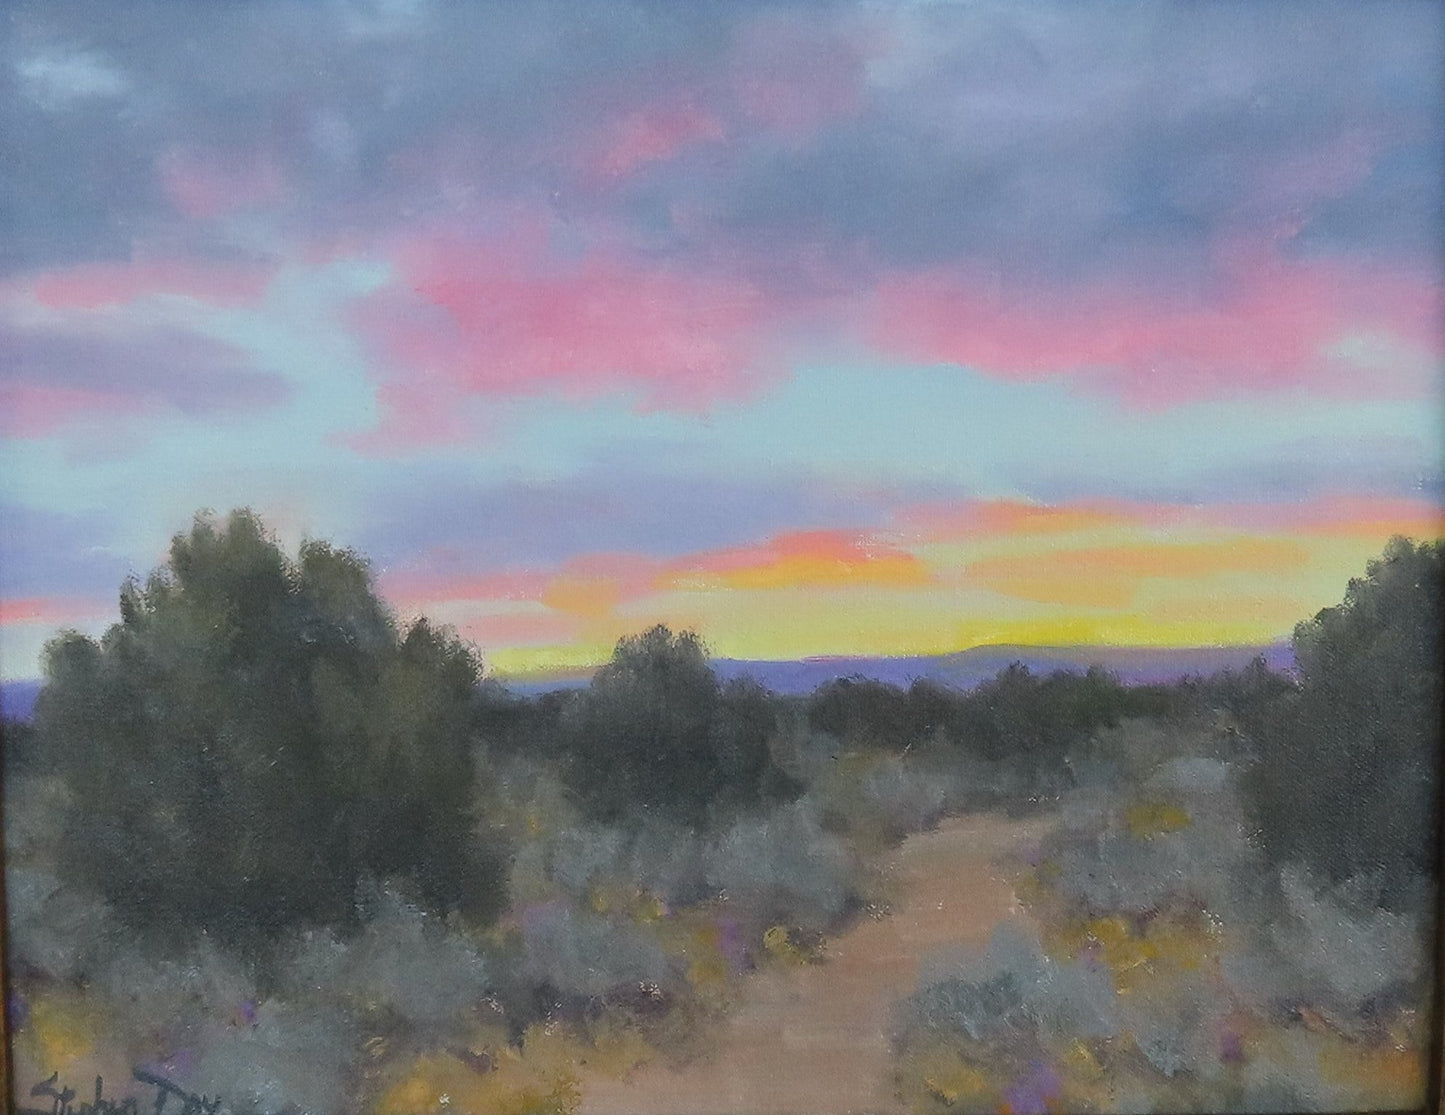 A Delightful Evening-painting-Stephen Day-Sorrel Sky Gallery